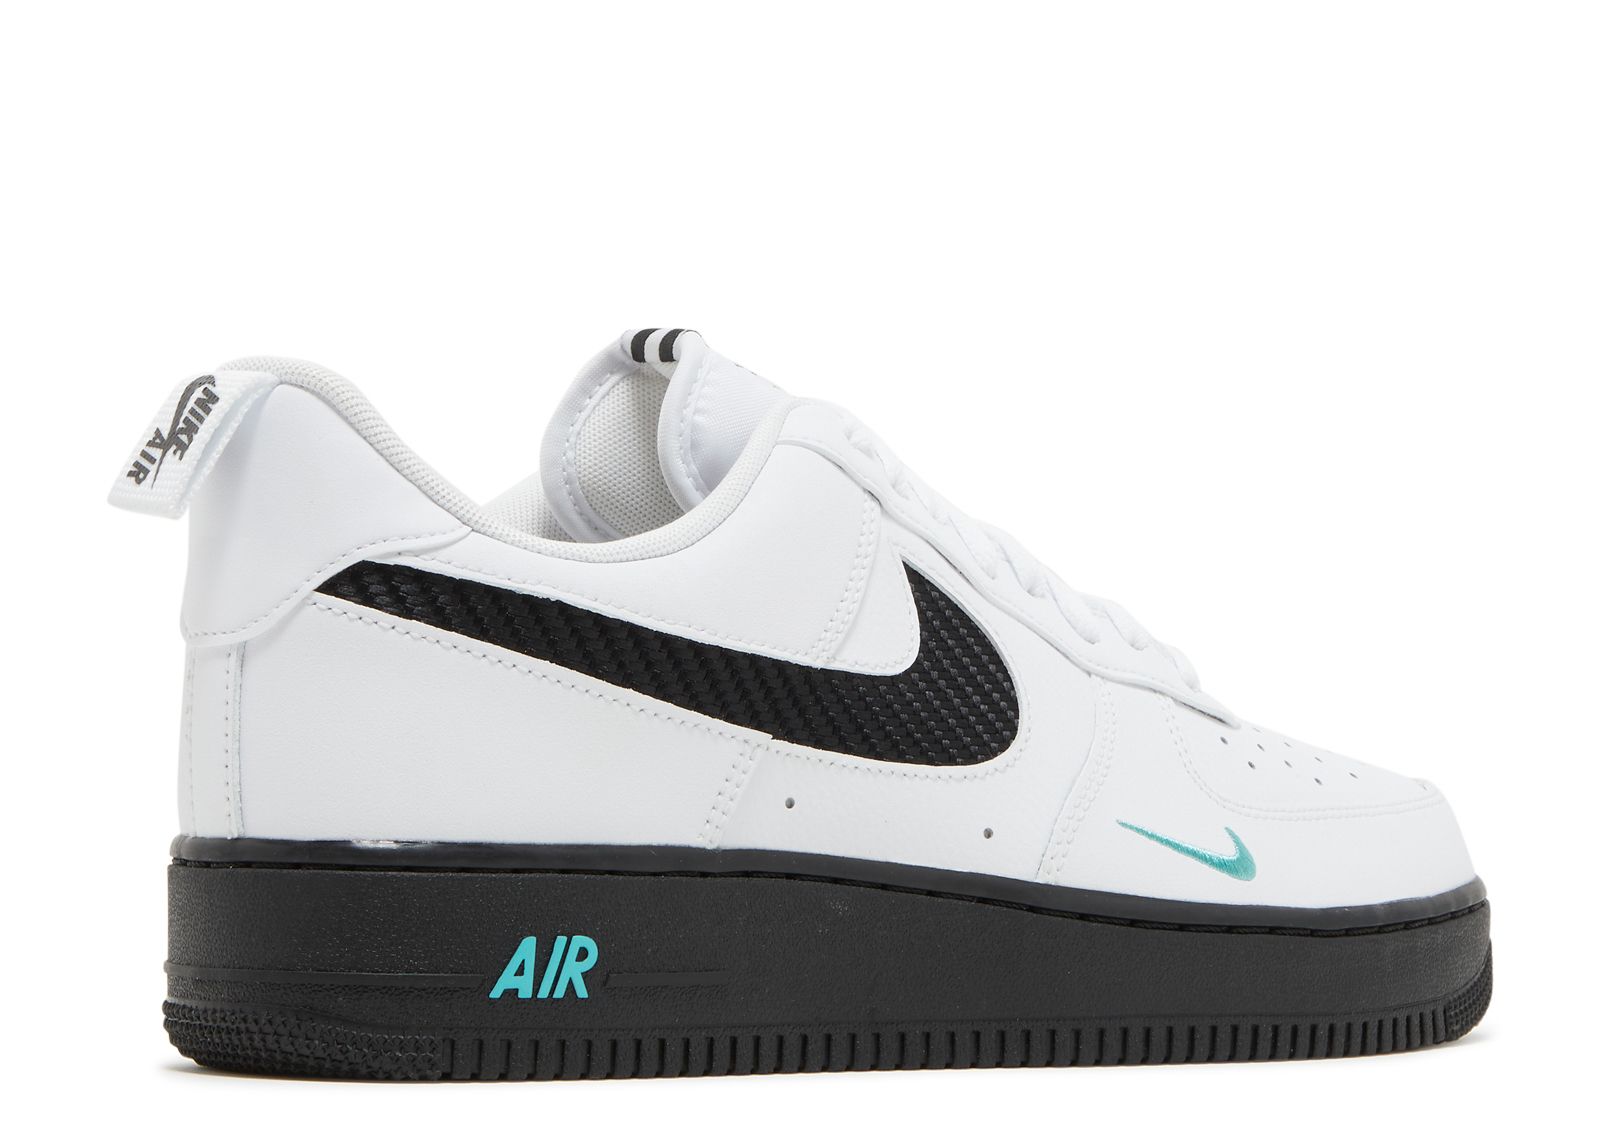 Air Force 1 LV8 Tiffany Teal On Foot Sneaker Review QuickSchopes 343  Schopes DR0155 100 White Black 